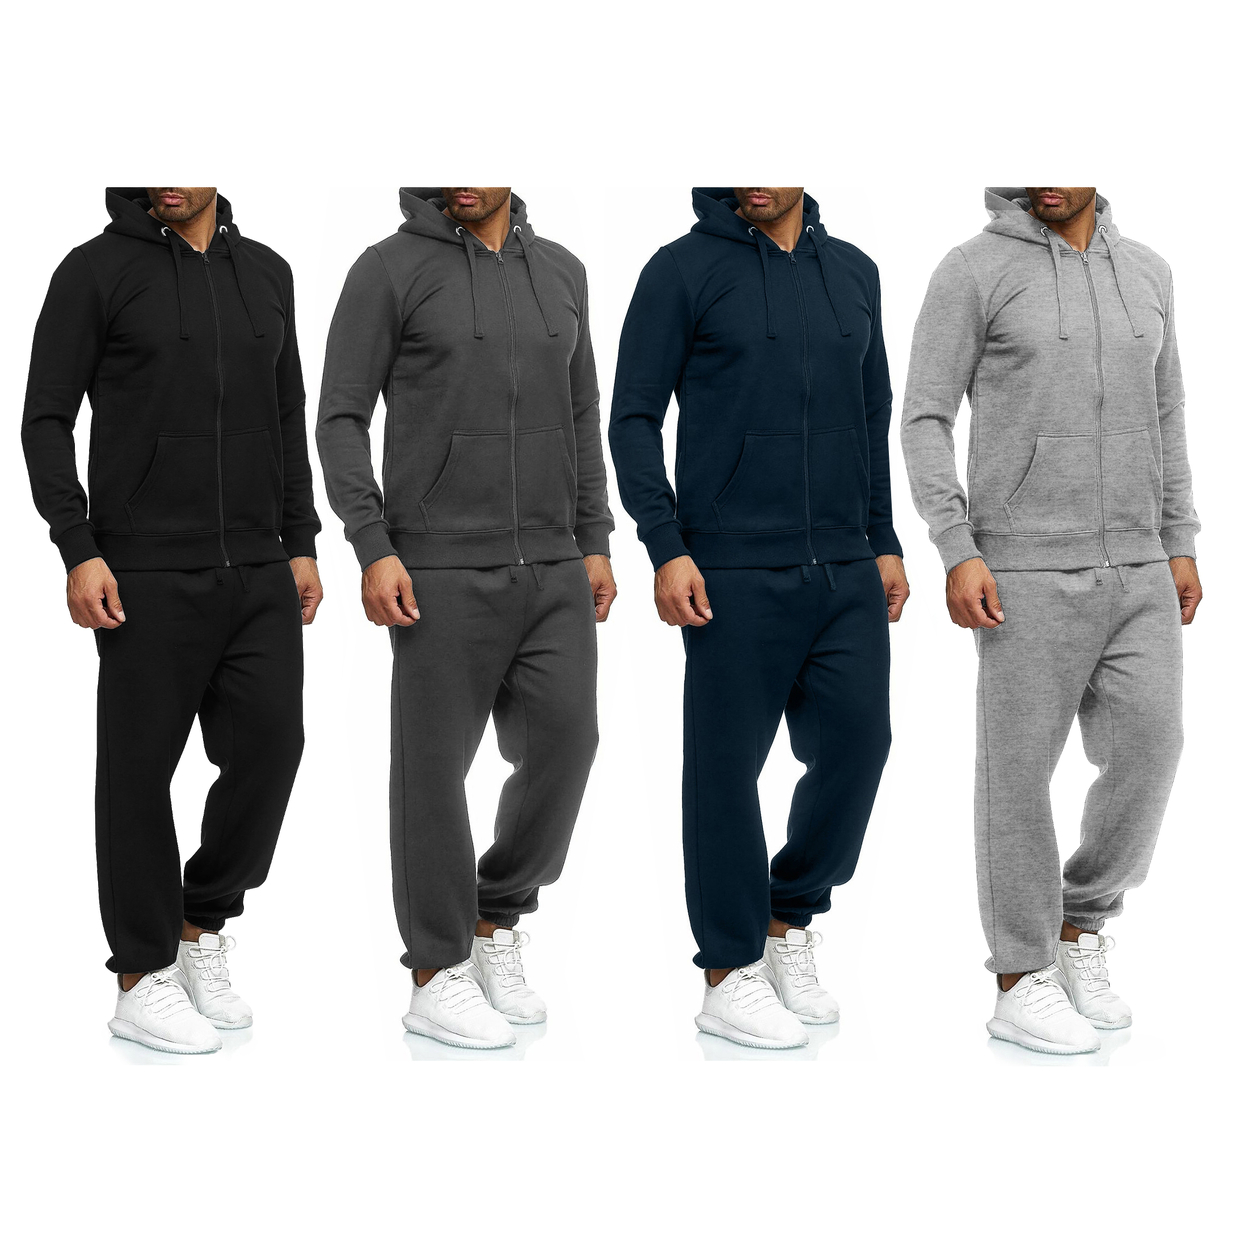 2-Pack: Men's Casual Big & Tall Athletic Active Winter Warm Fleece Lined Full Zip Tracksuit Jogger Set - Charcoal, Medium